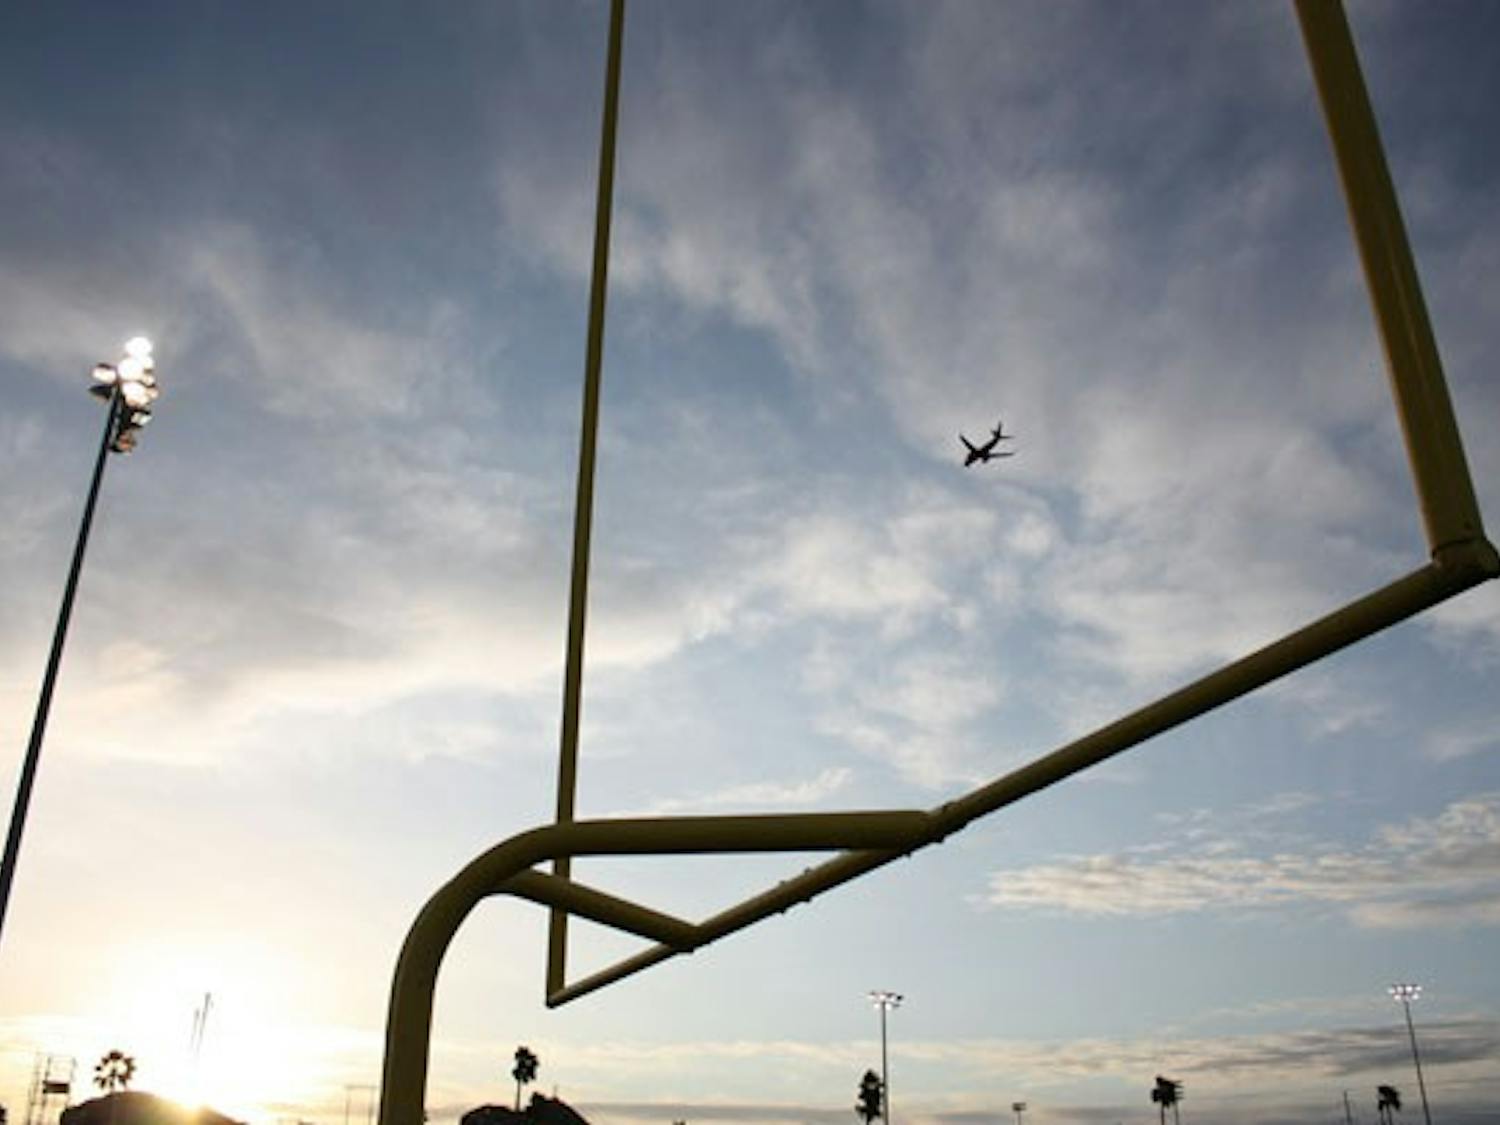 HIGH FLYING: At sunset, a plane flies "through" the field goal on the football practice field during practice last week. (Photo by Kyle Thompson)